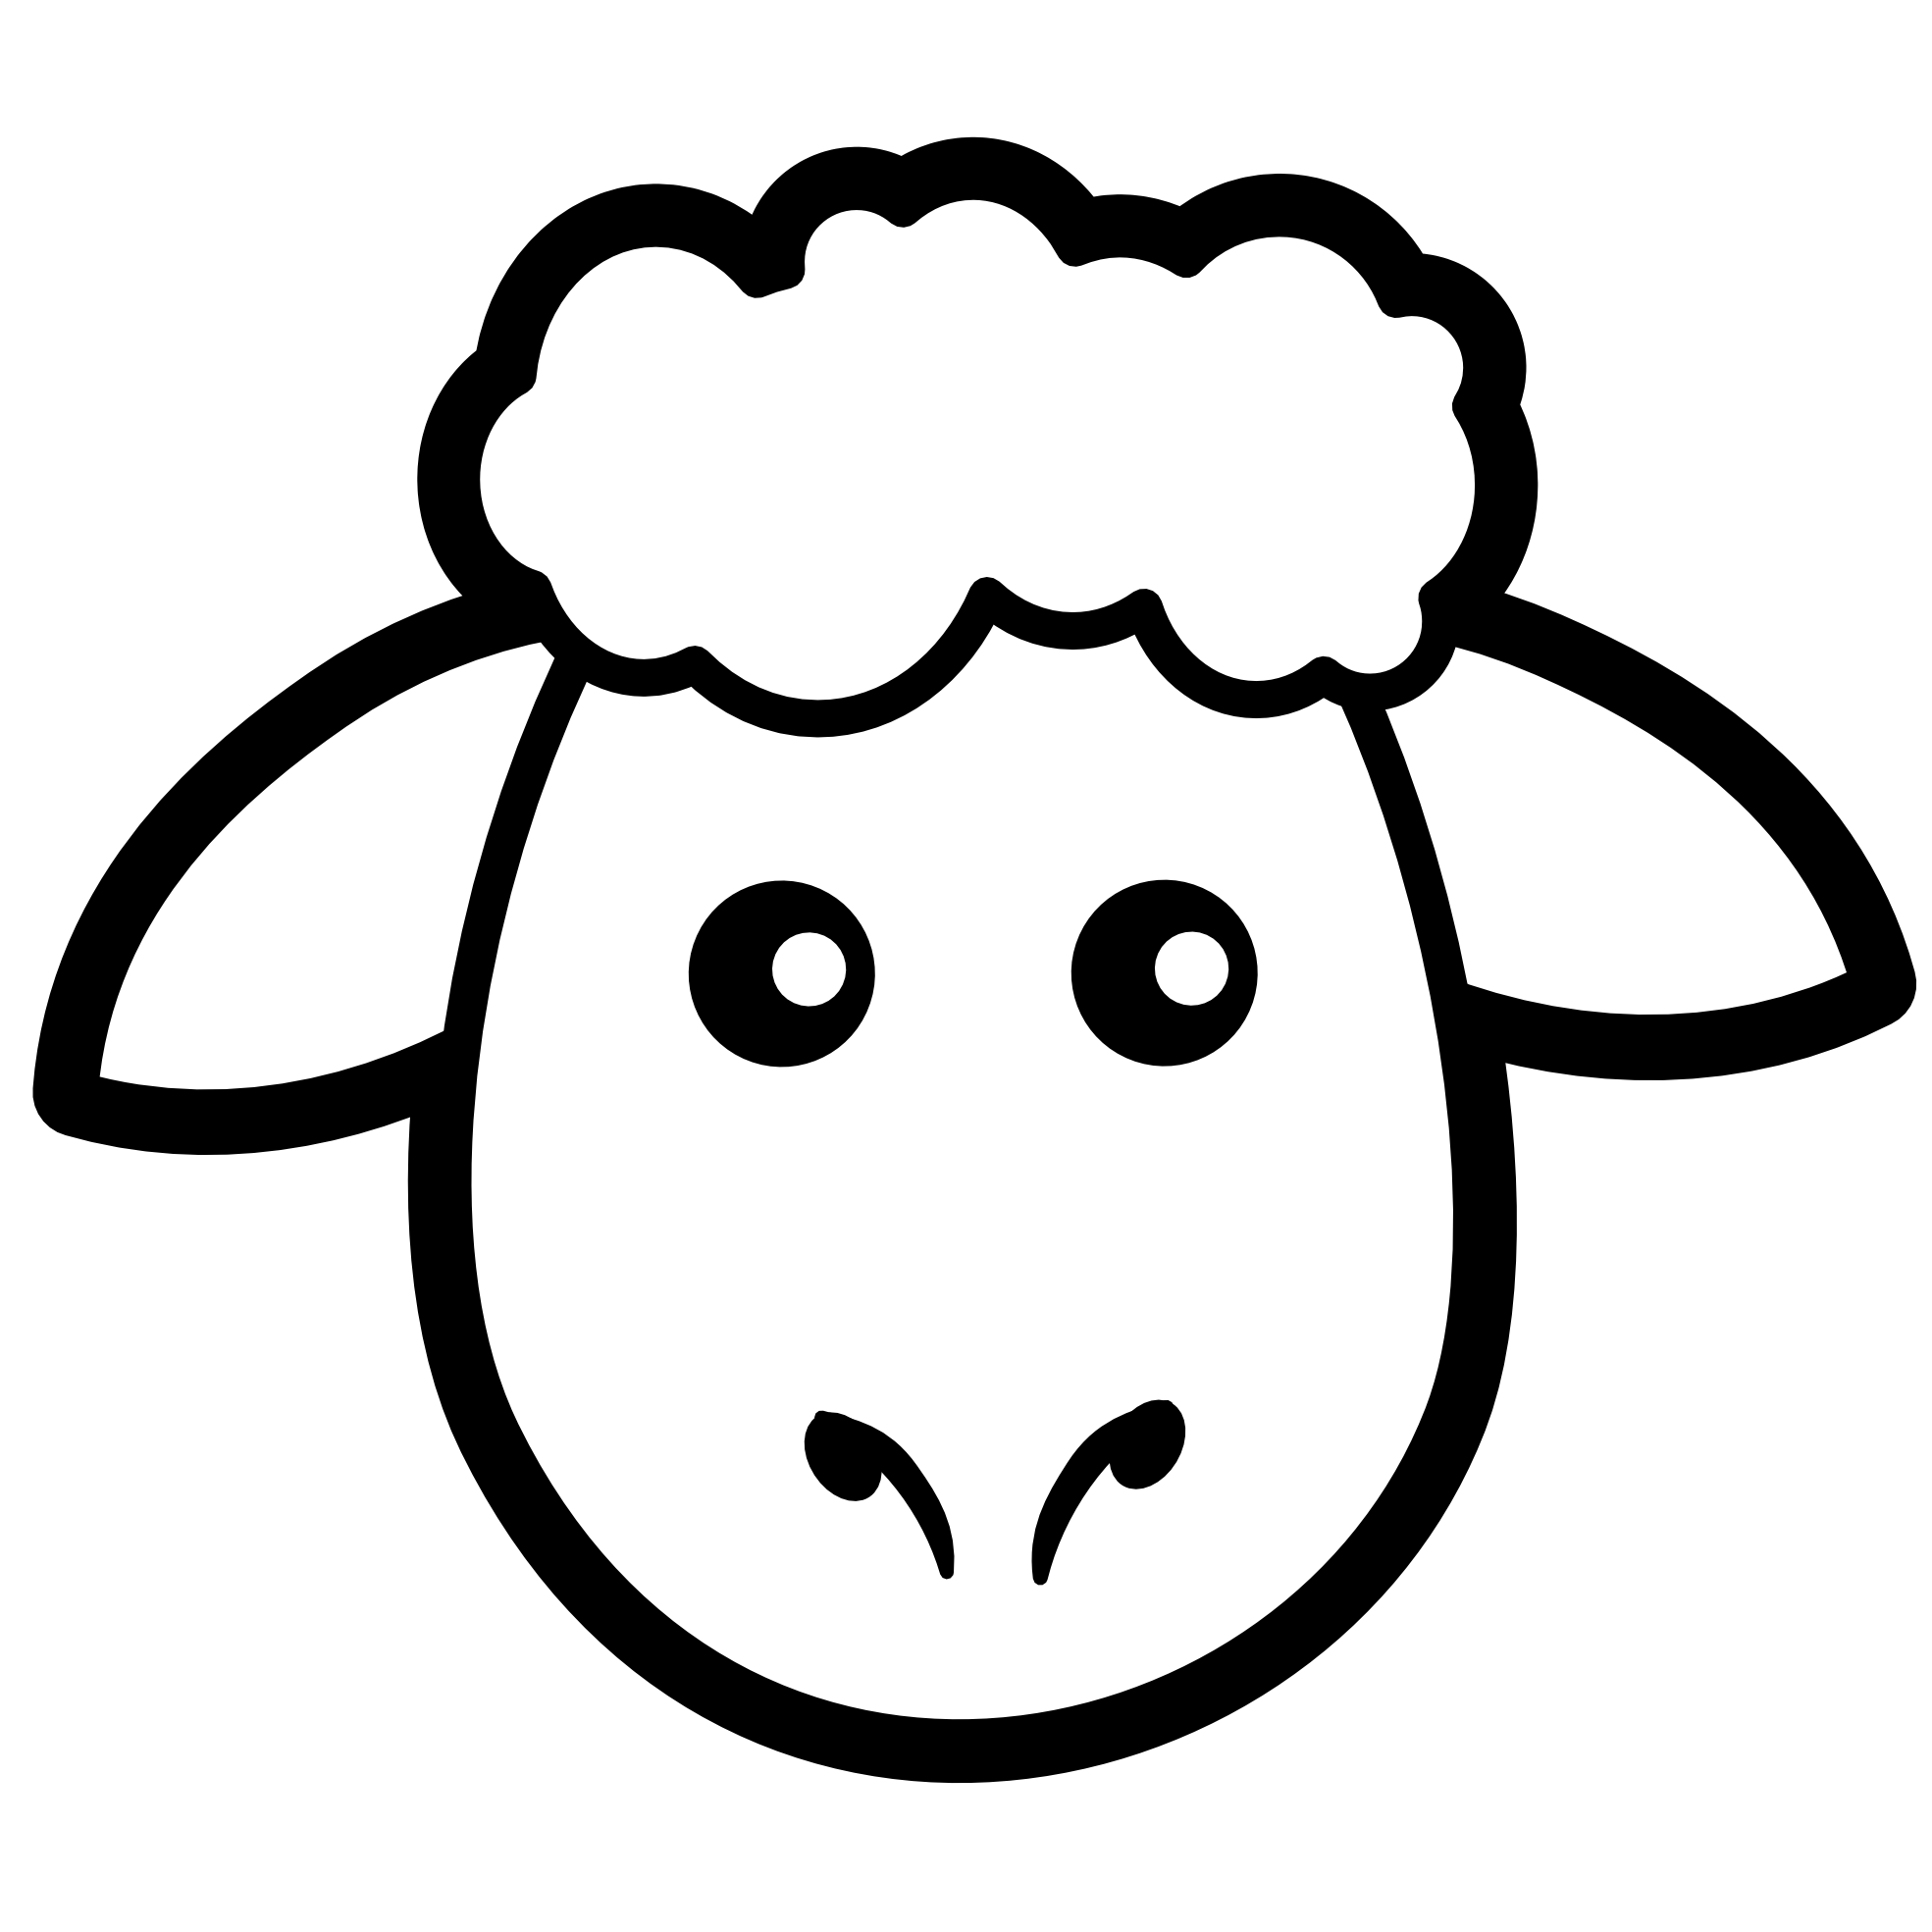 Cross clipart lamb. Straight face black and